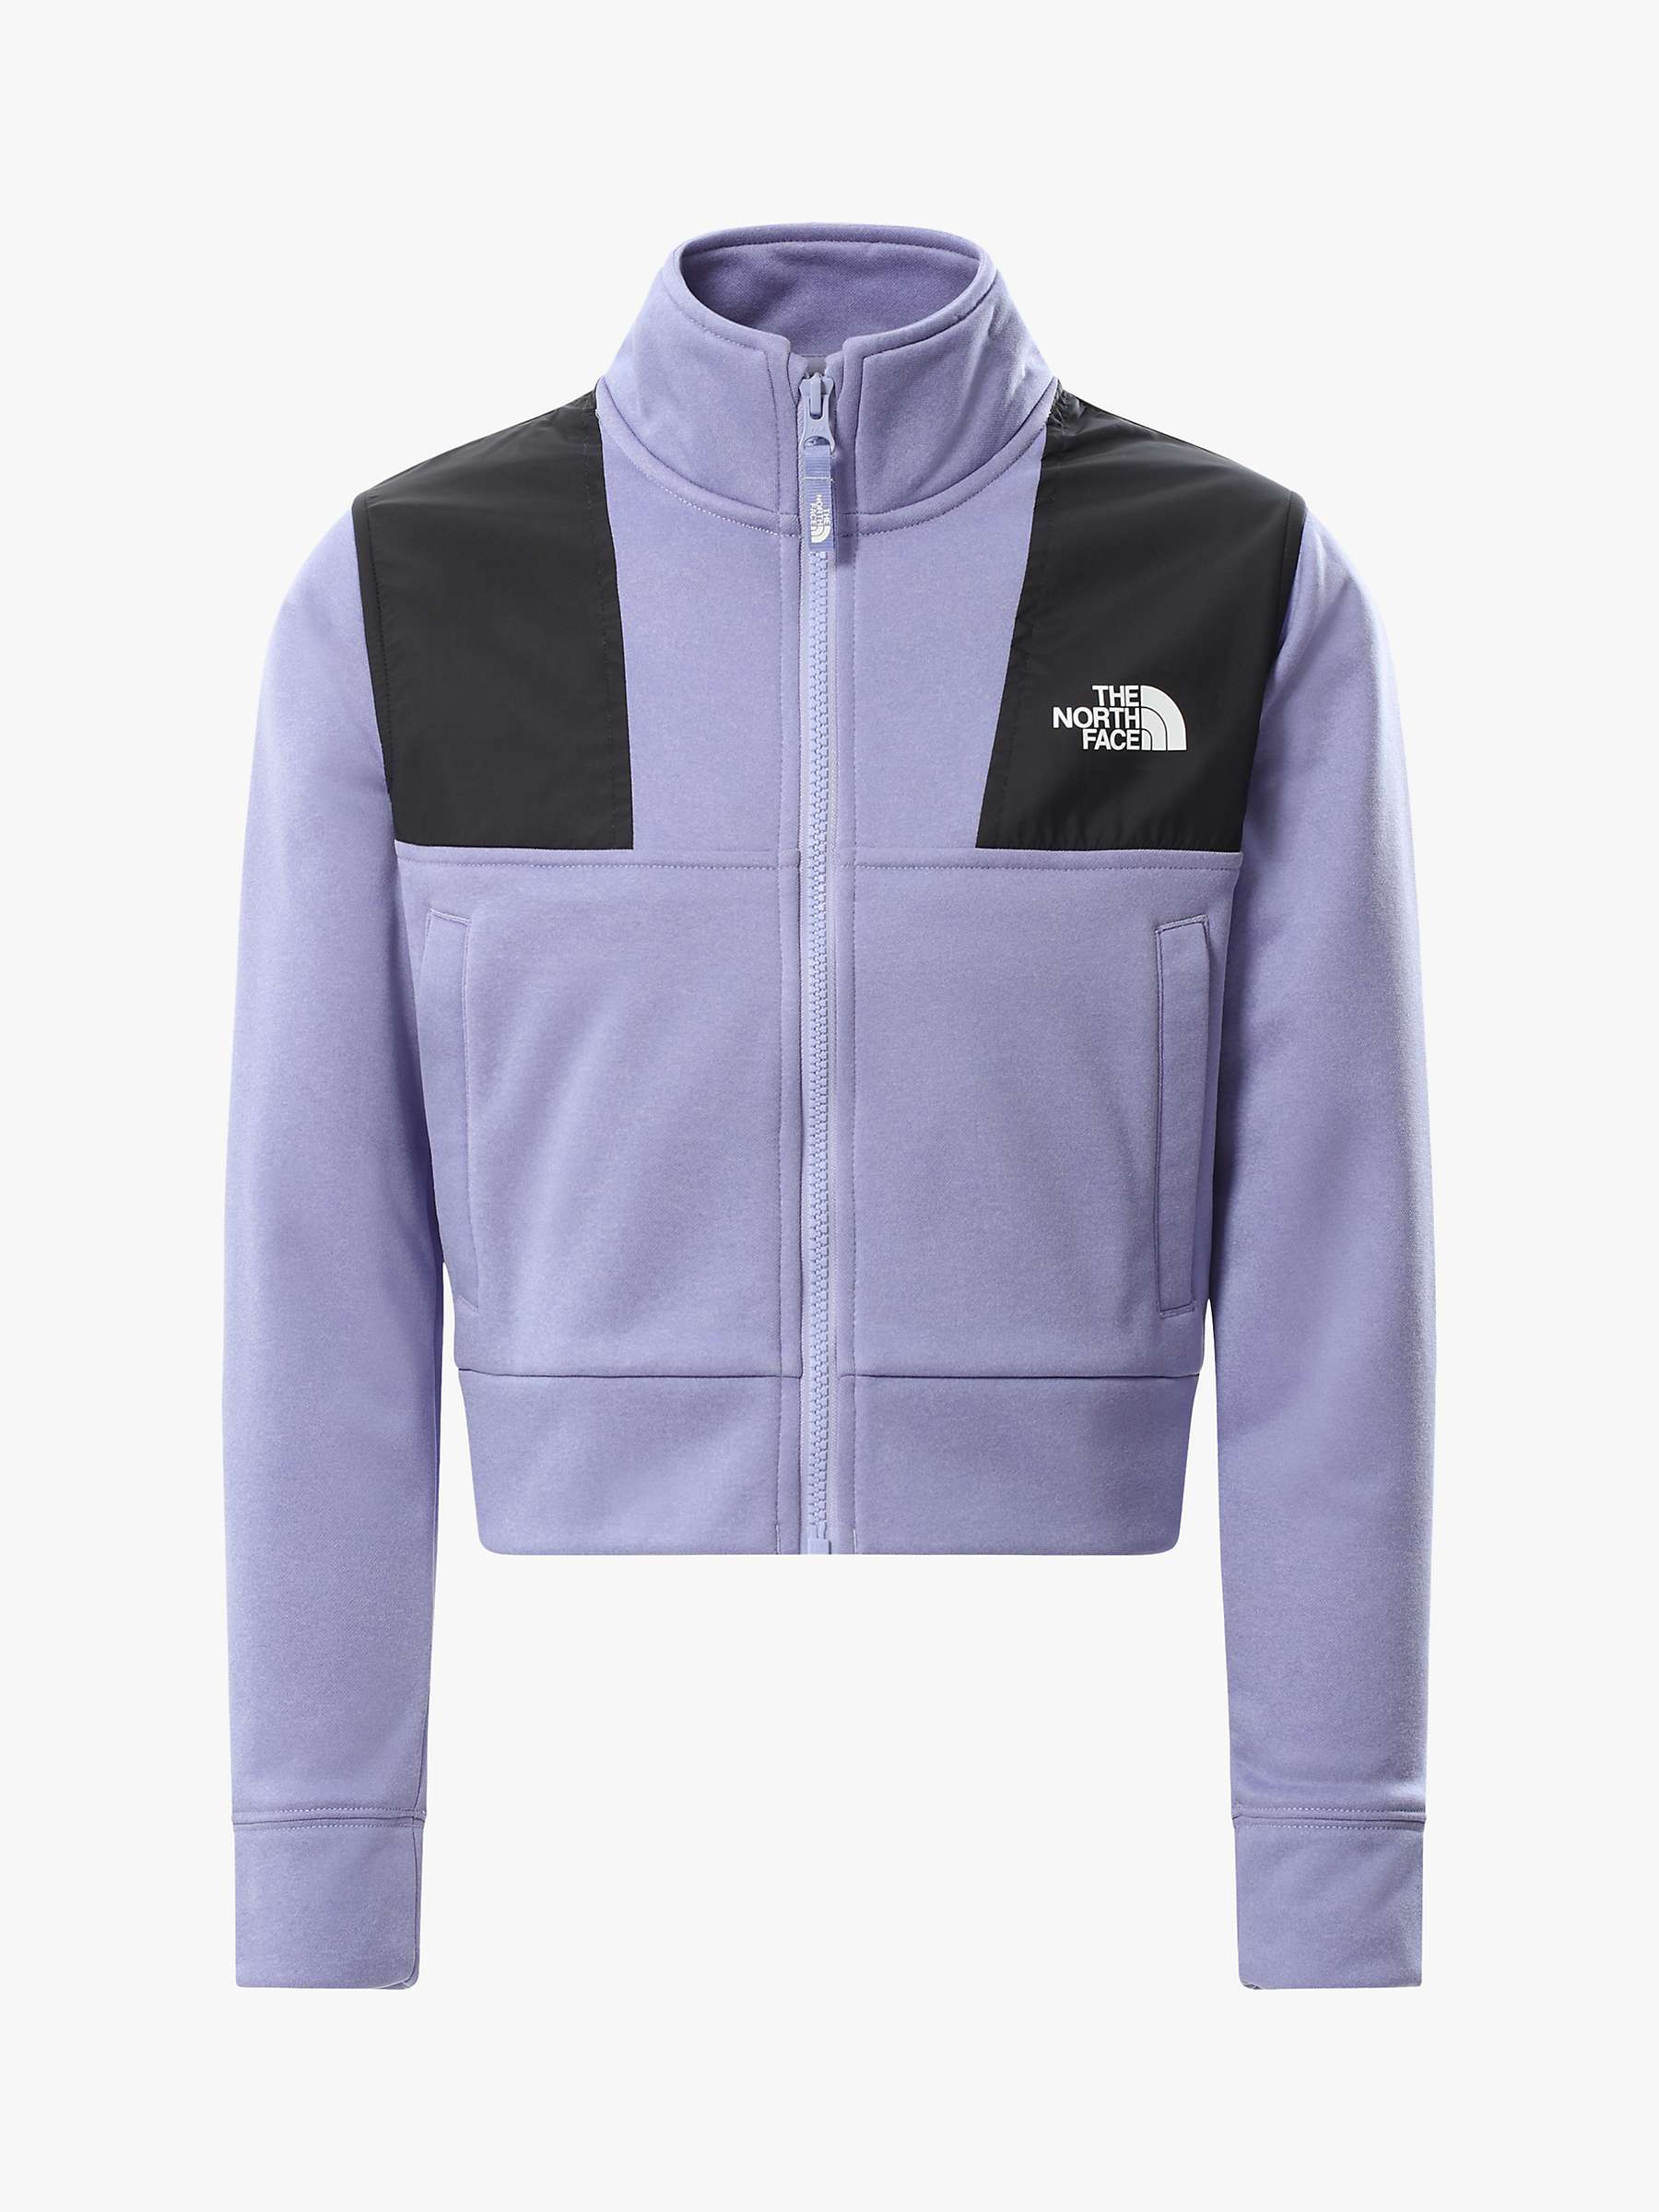 Buy The North Face Kids' Surgent Full Zip Cropped Jumper Online at johnlewis.com